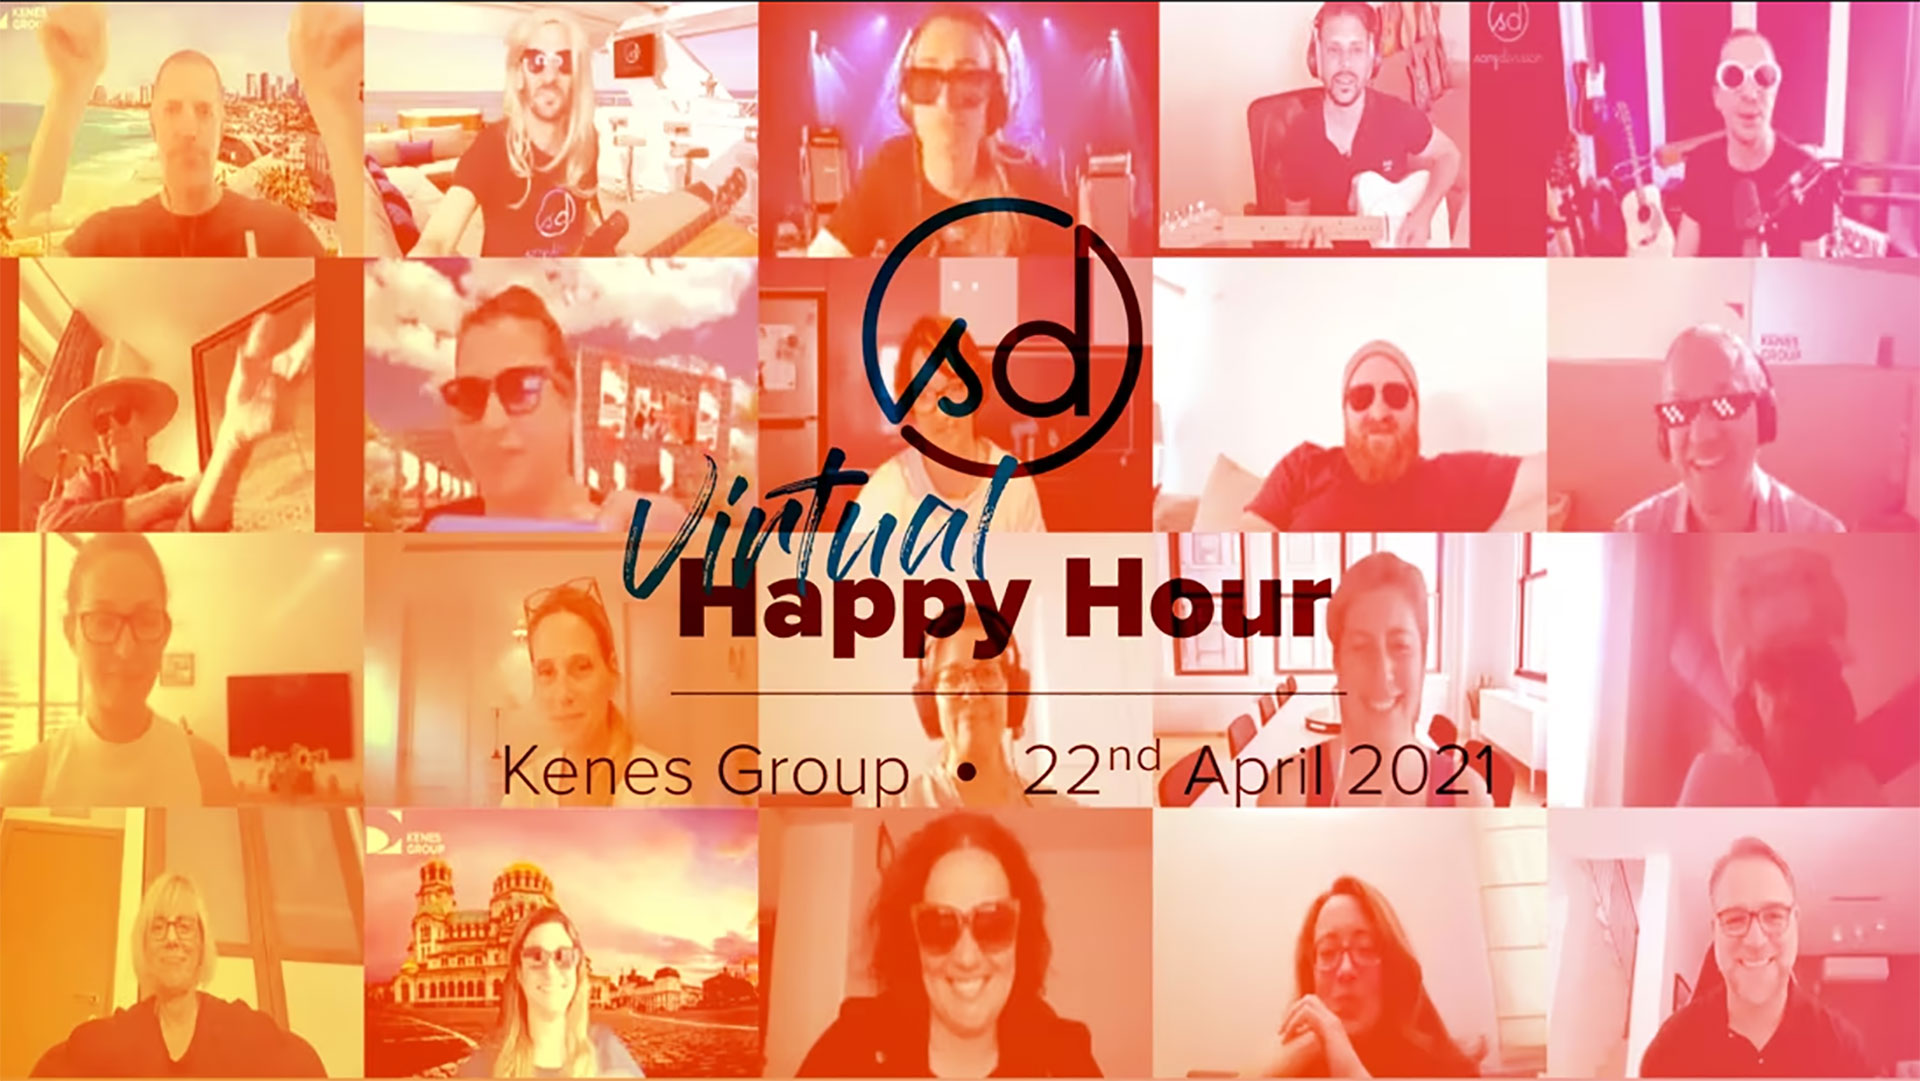 Kenes Group: Virtual Happy Hour with SongDivision